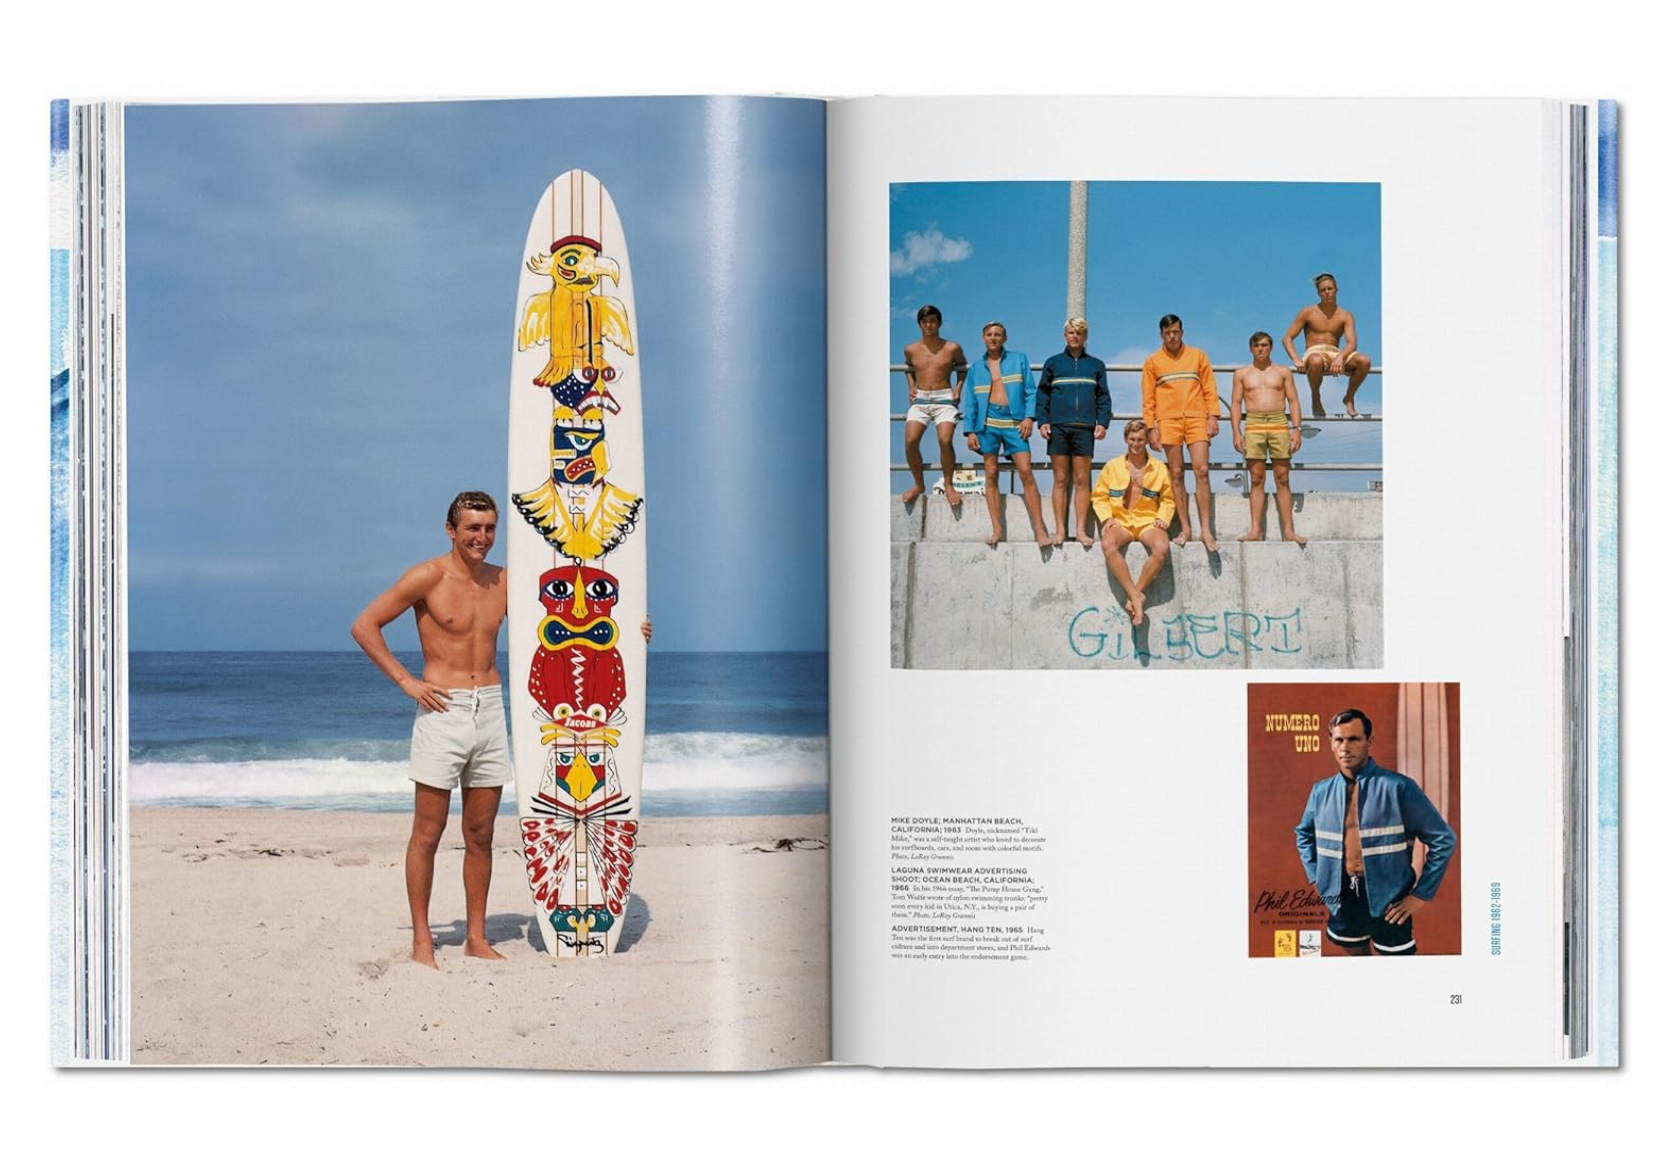 A magazine spread featuring a man posing next to two colorful surfboards on the left and a group of older men in swim trunks seated on a wall by the beach in Scottsdale, Arizona, on the right, showcasing the "Breitling Book of Surfing" published by Random House.